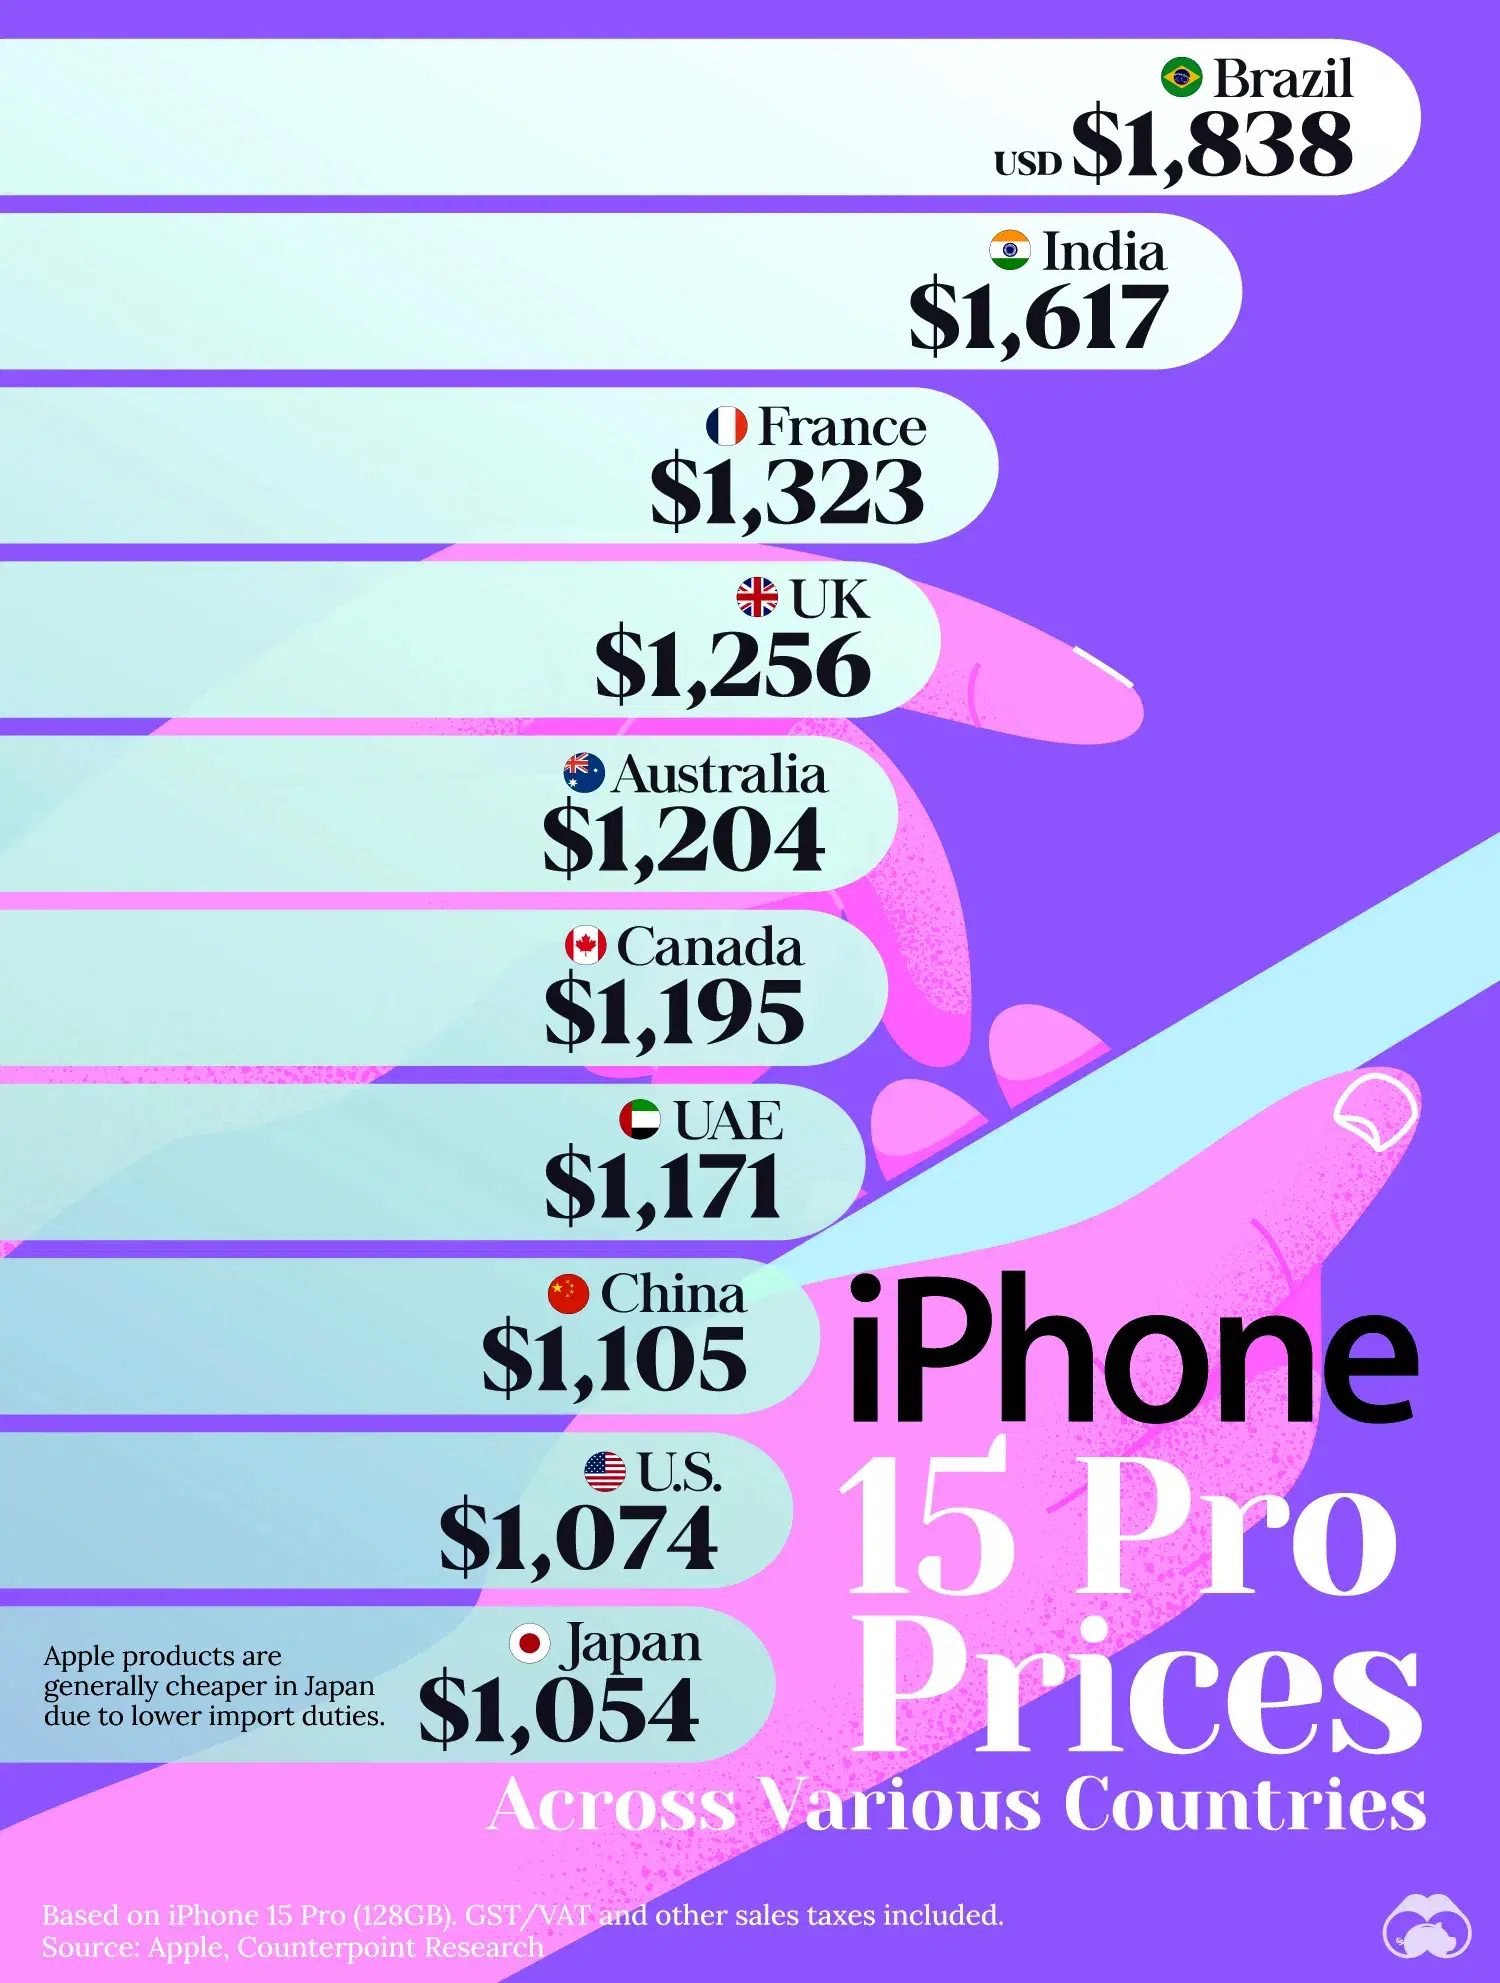 Japan and the U.S. are the cheapest countries to buy an iPhone 15 Pro 📱